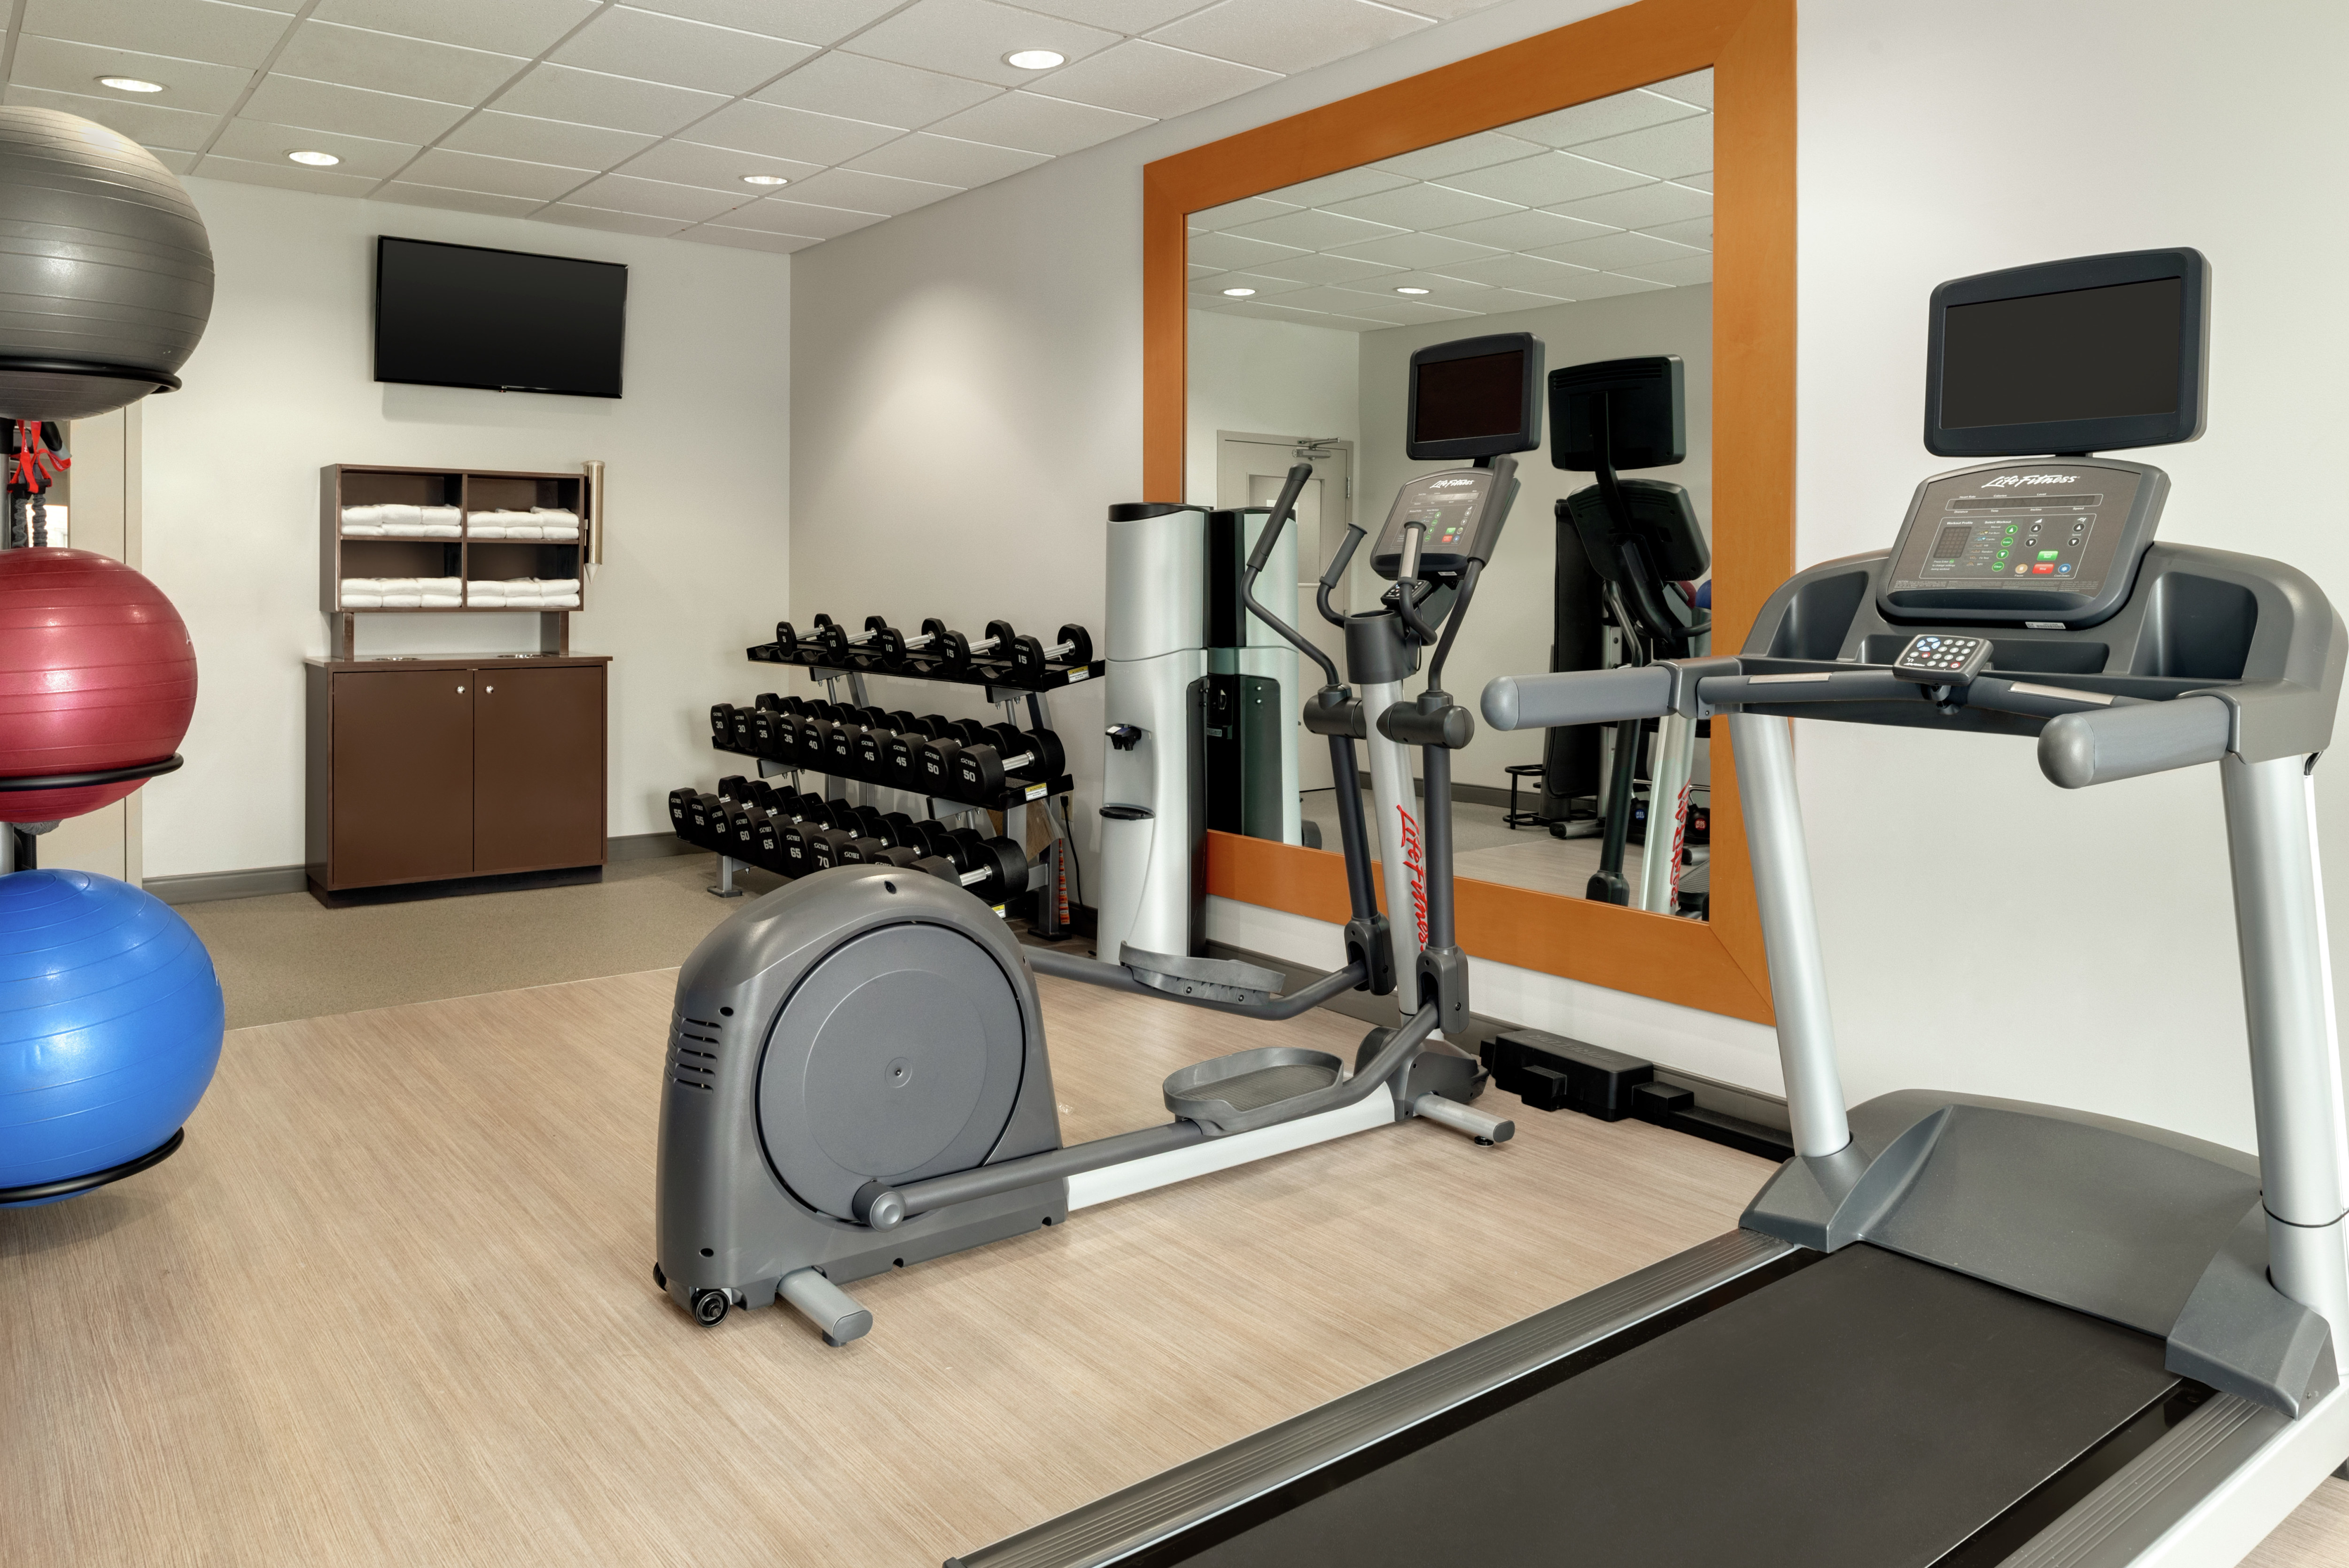 Convenient on-site fitness center fully equipped with cardio machines, free weights, and TV.